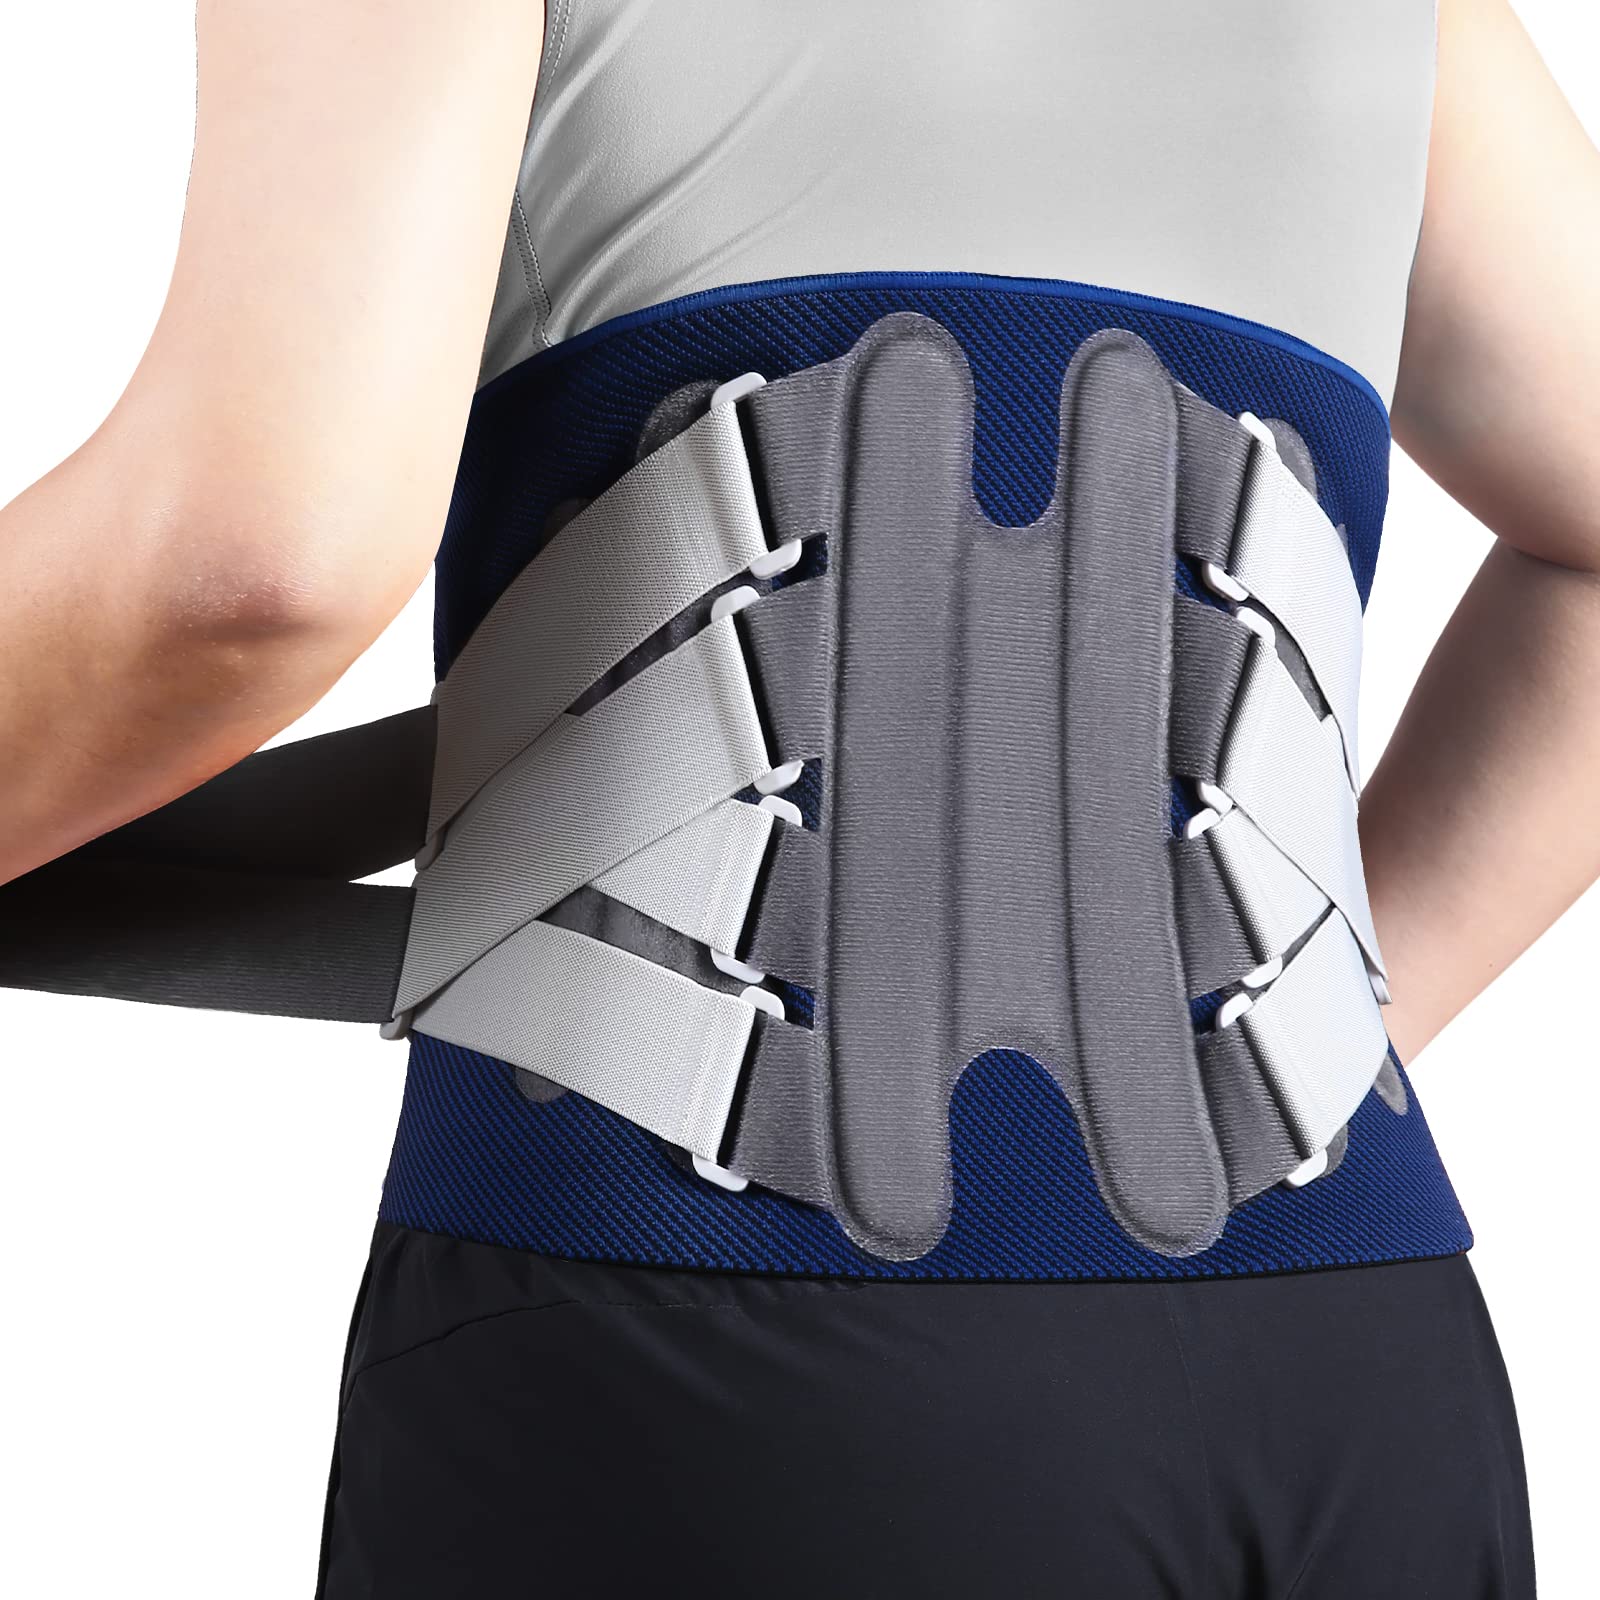 NEENCA Back Brace Posture Corrector for Women and Men – Neenca® Official  Store